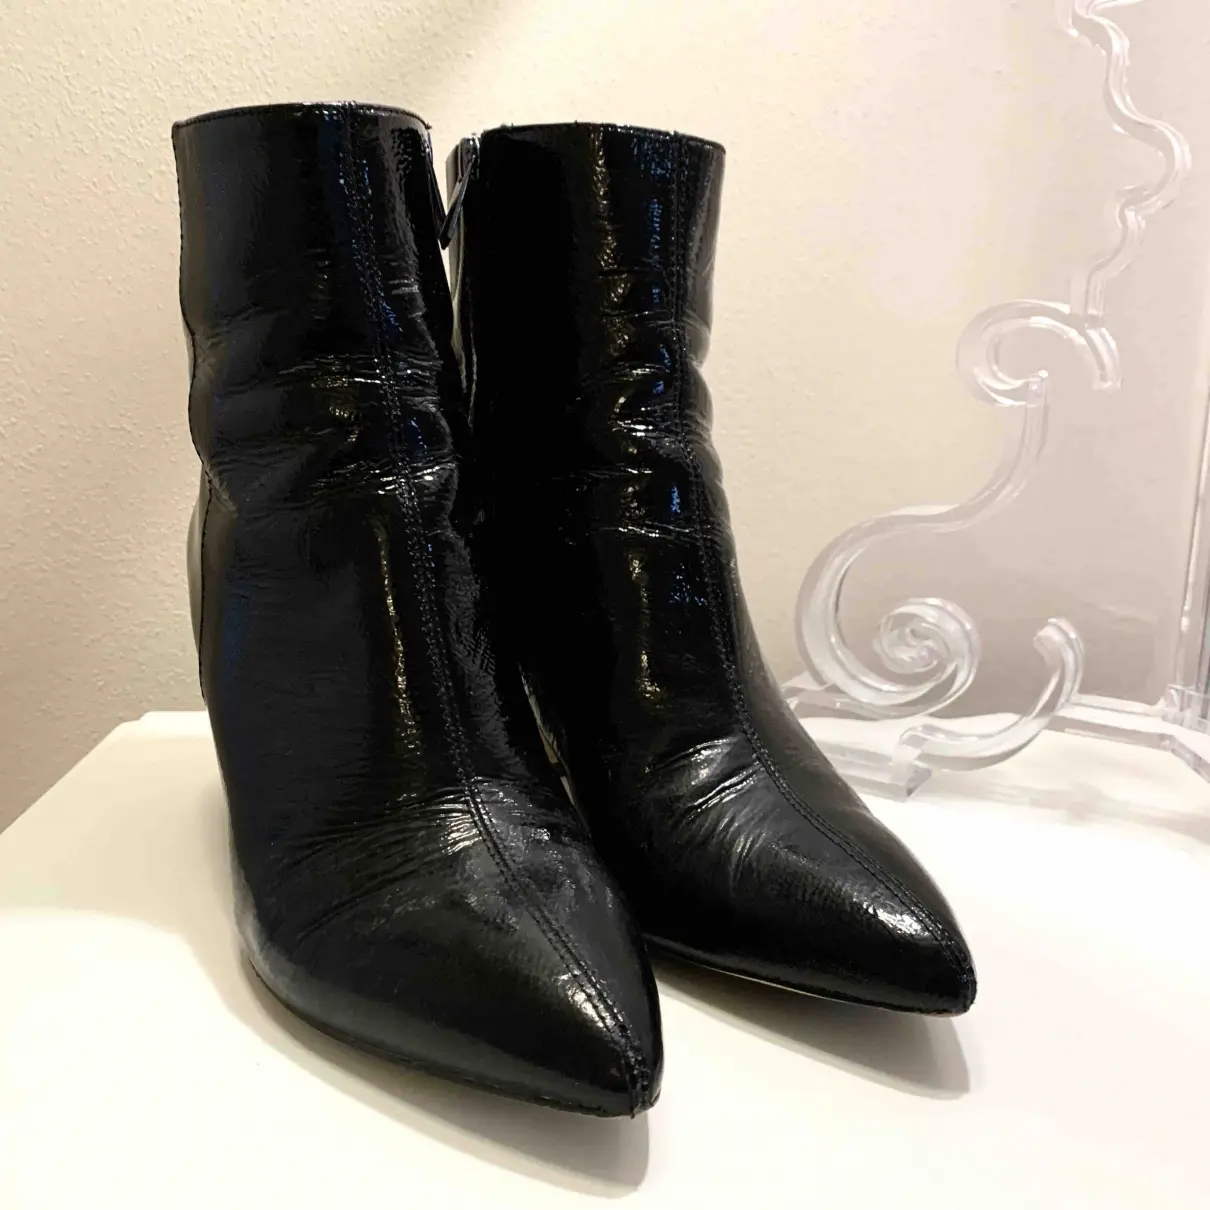 Buy Sam Edelman Patent leather ankle boots online